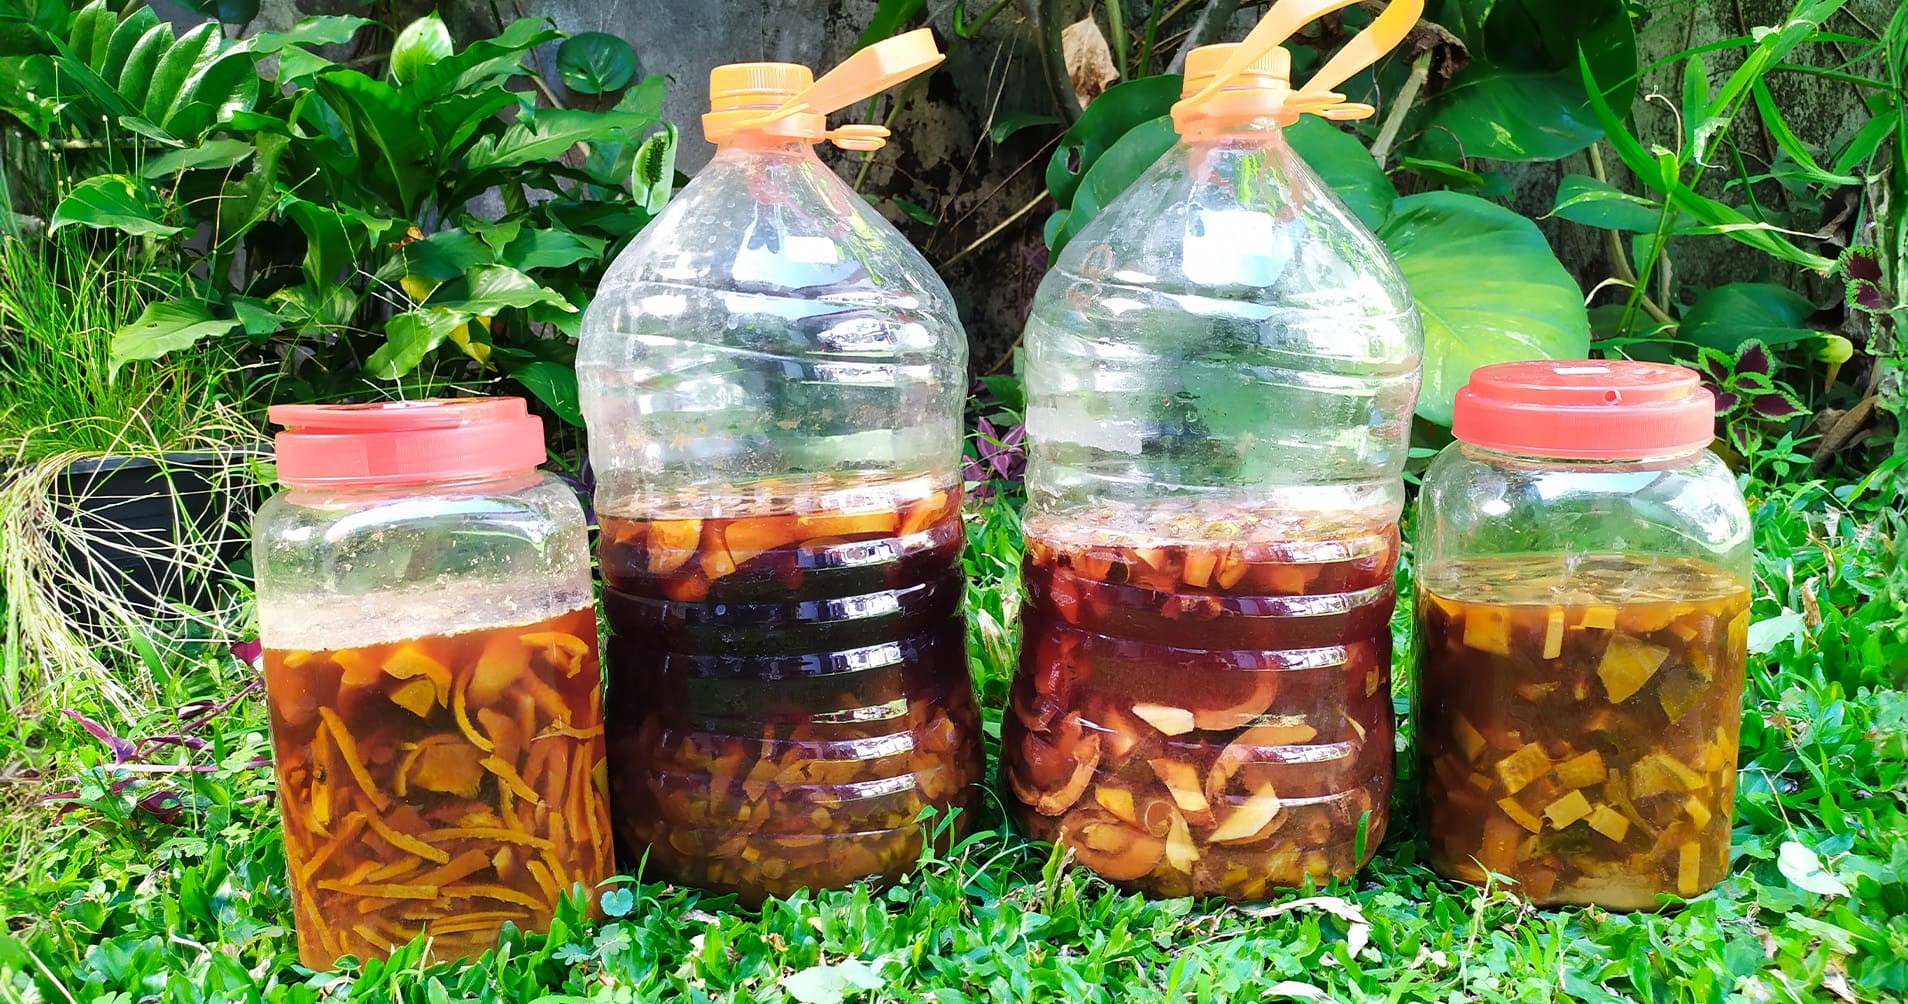 Eco Enzyme: The Multipurpose Liquid from Kitchen Waste